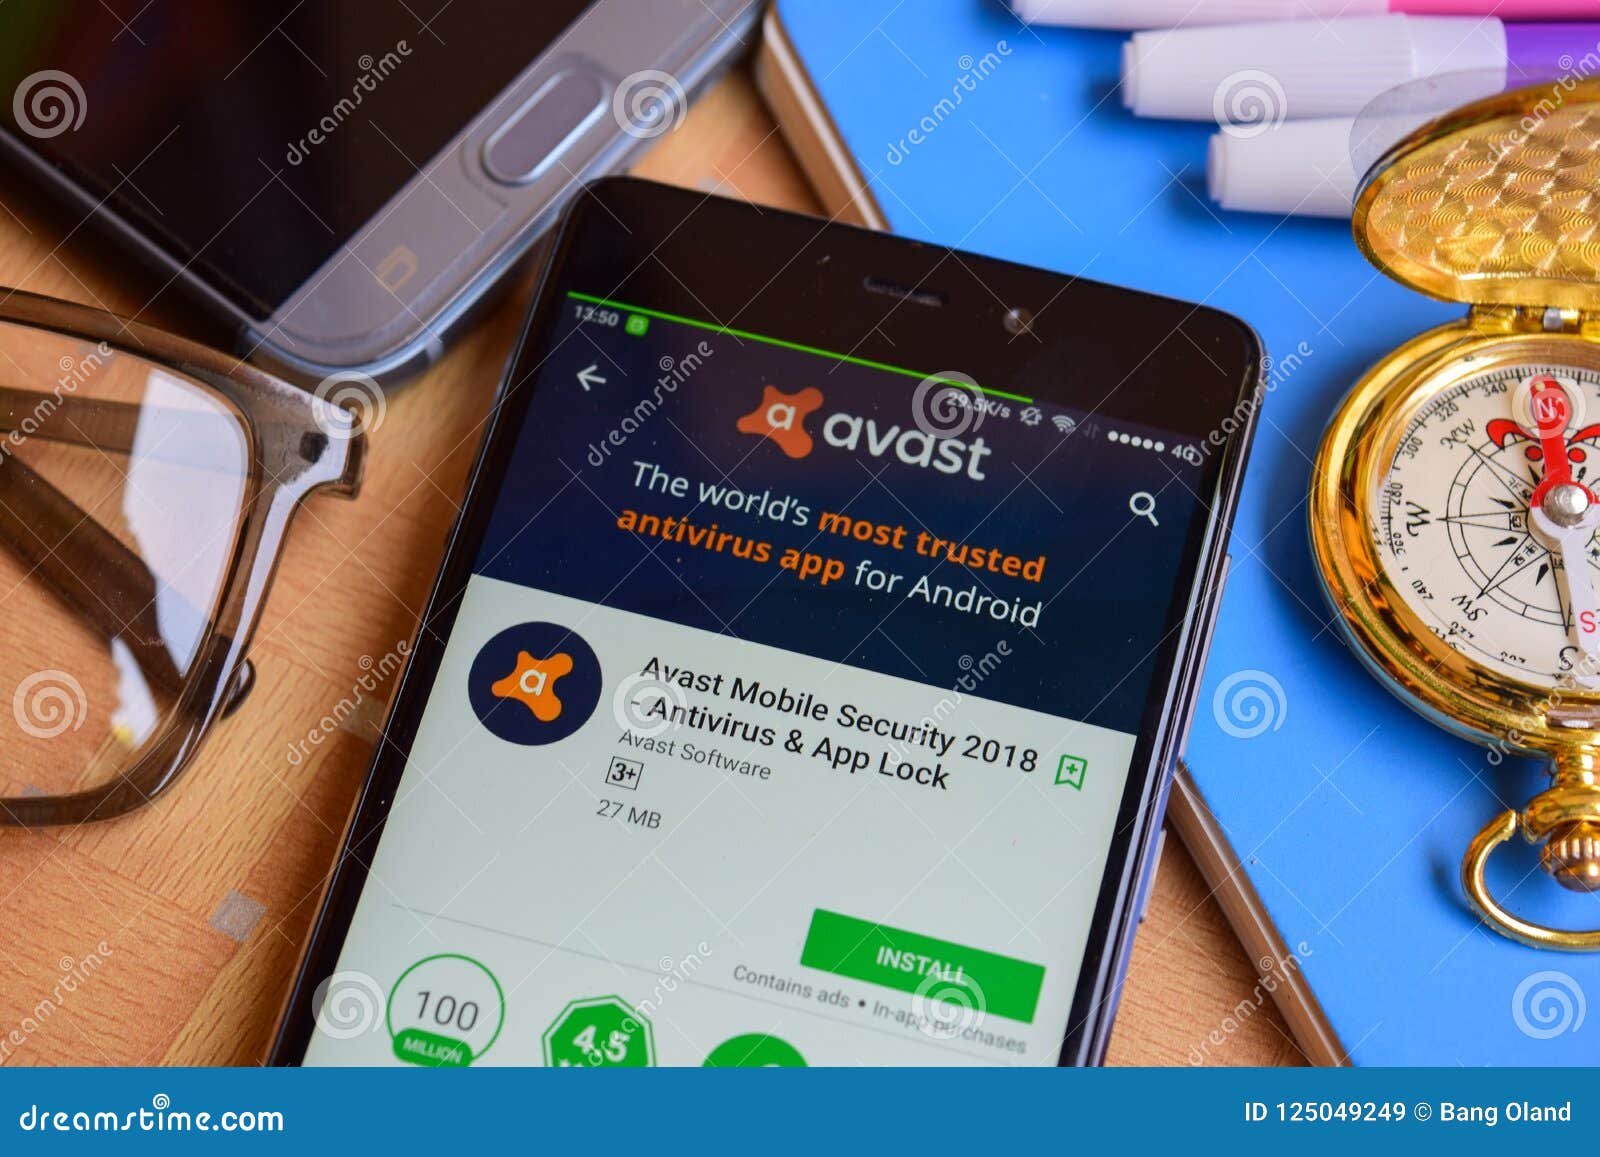 download avast mobile security and antivirus